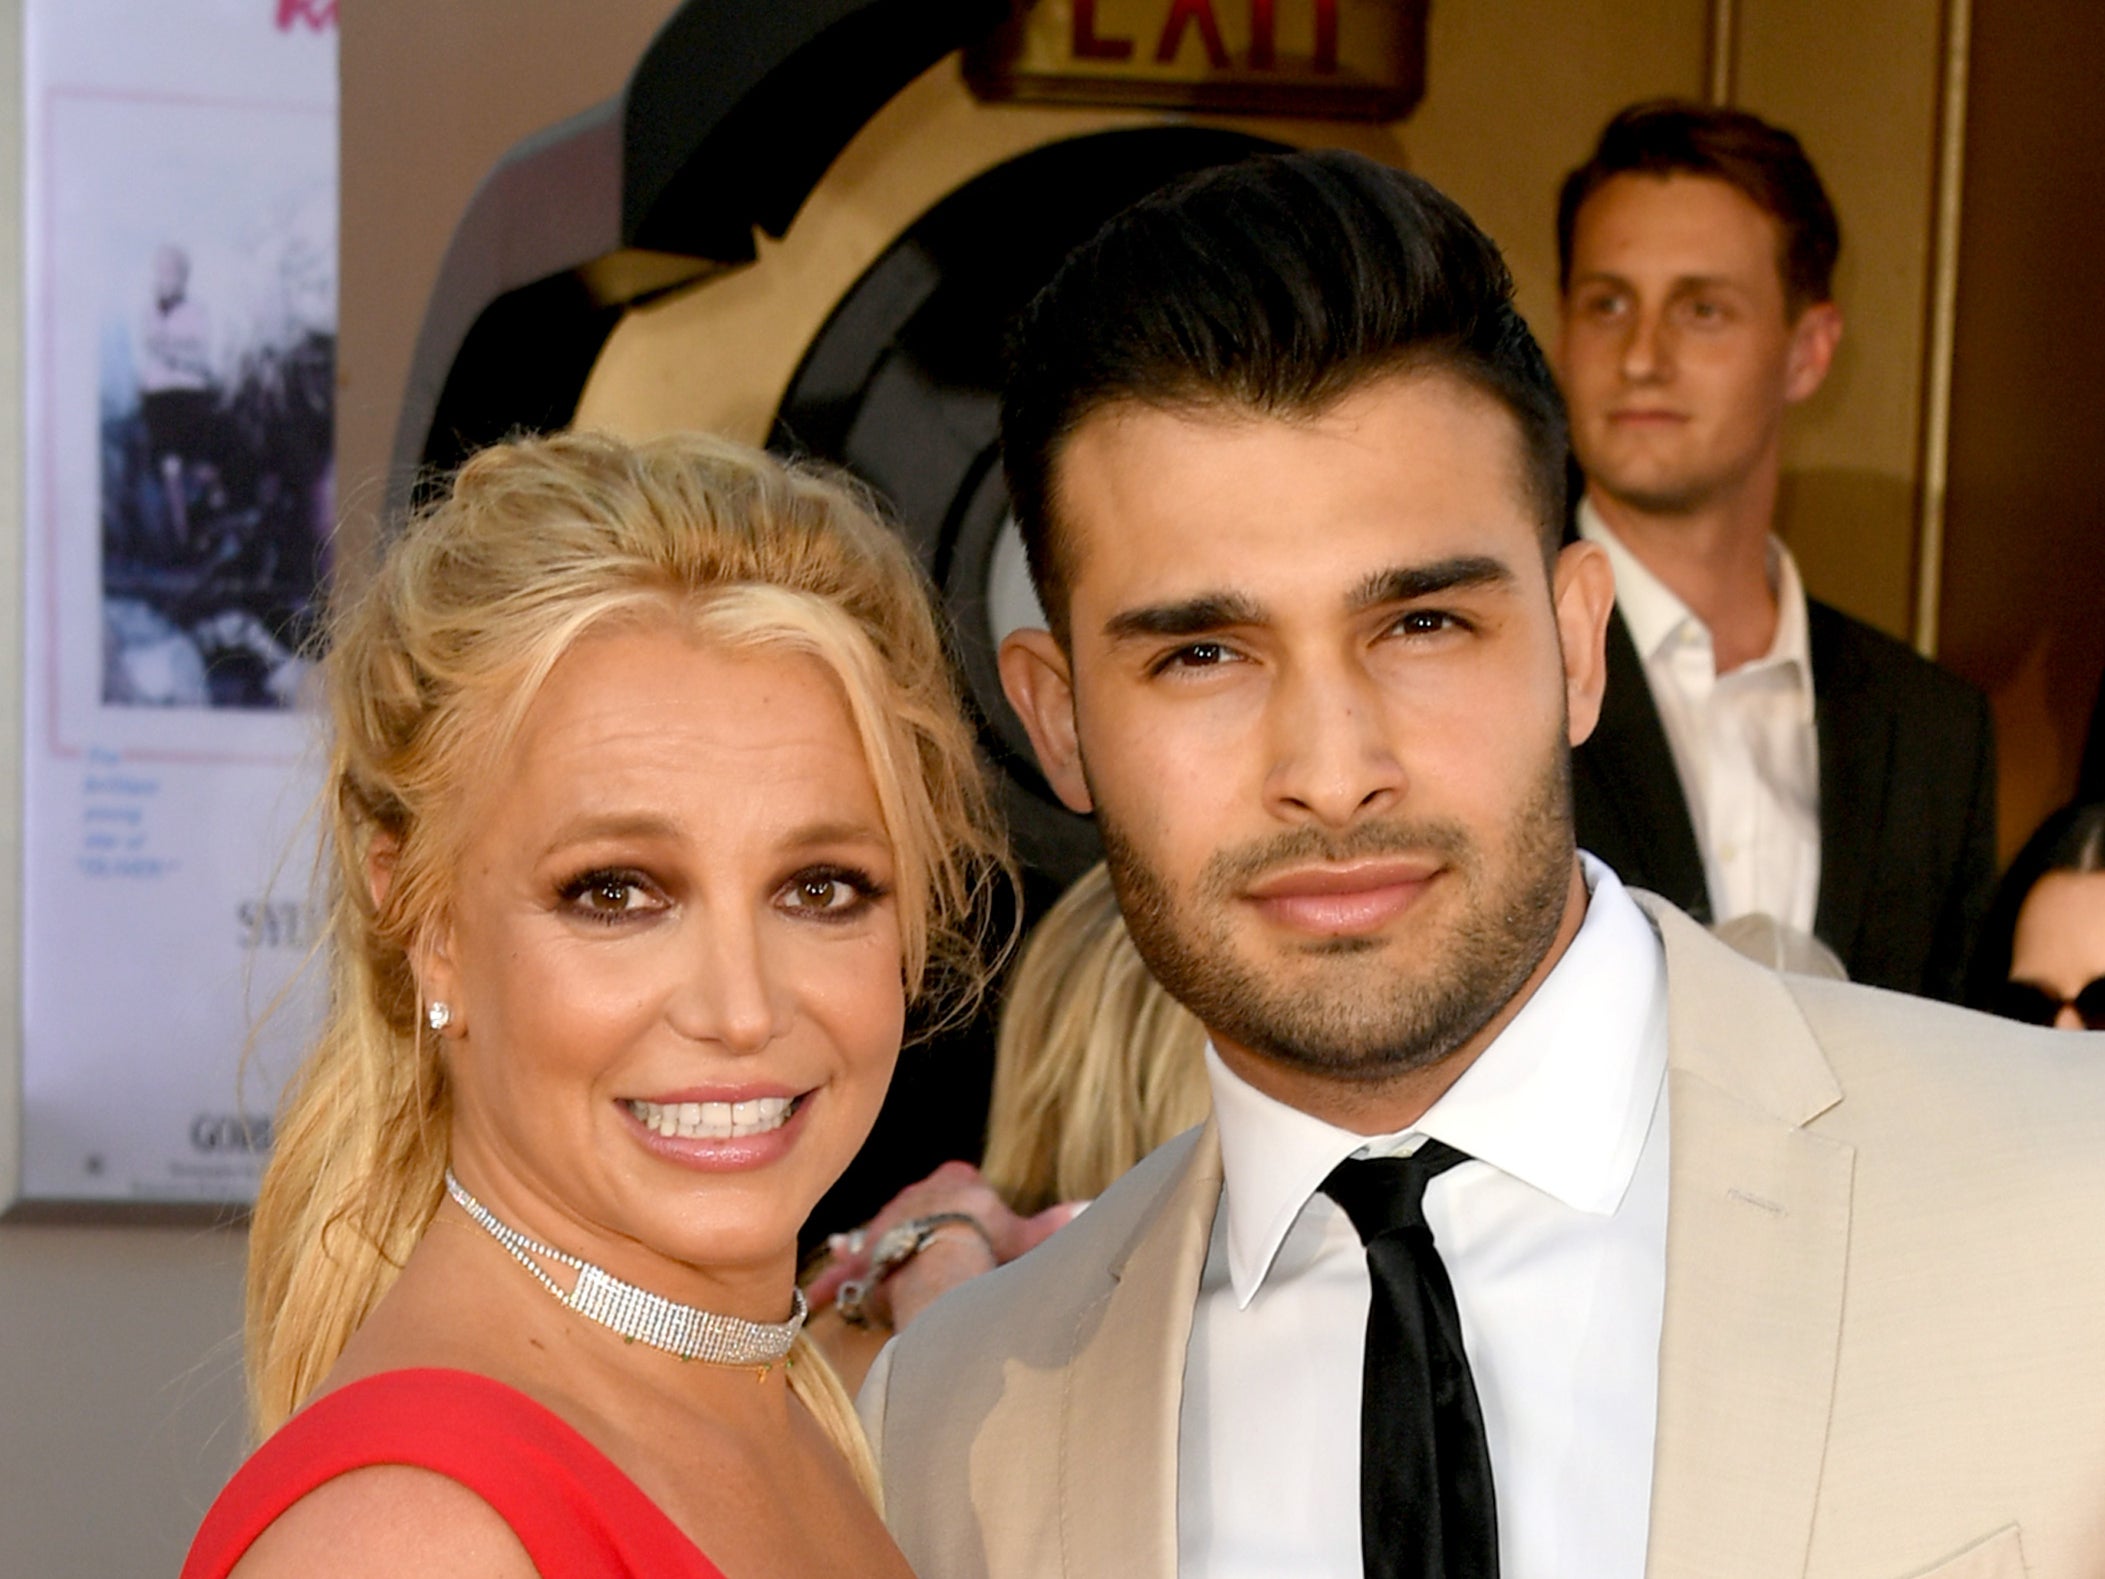 Britney Spears and Sam Asghari have been dating since 2016